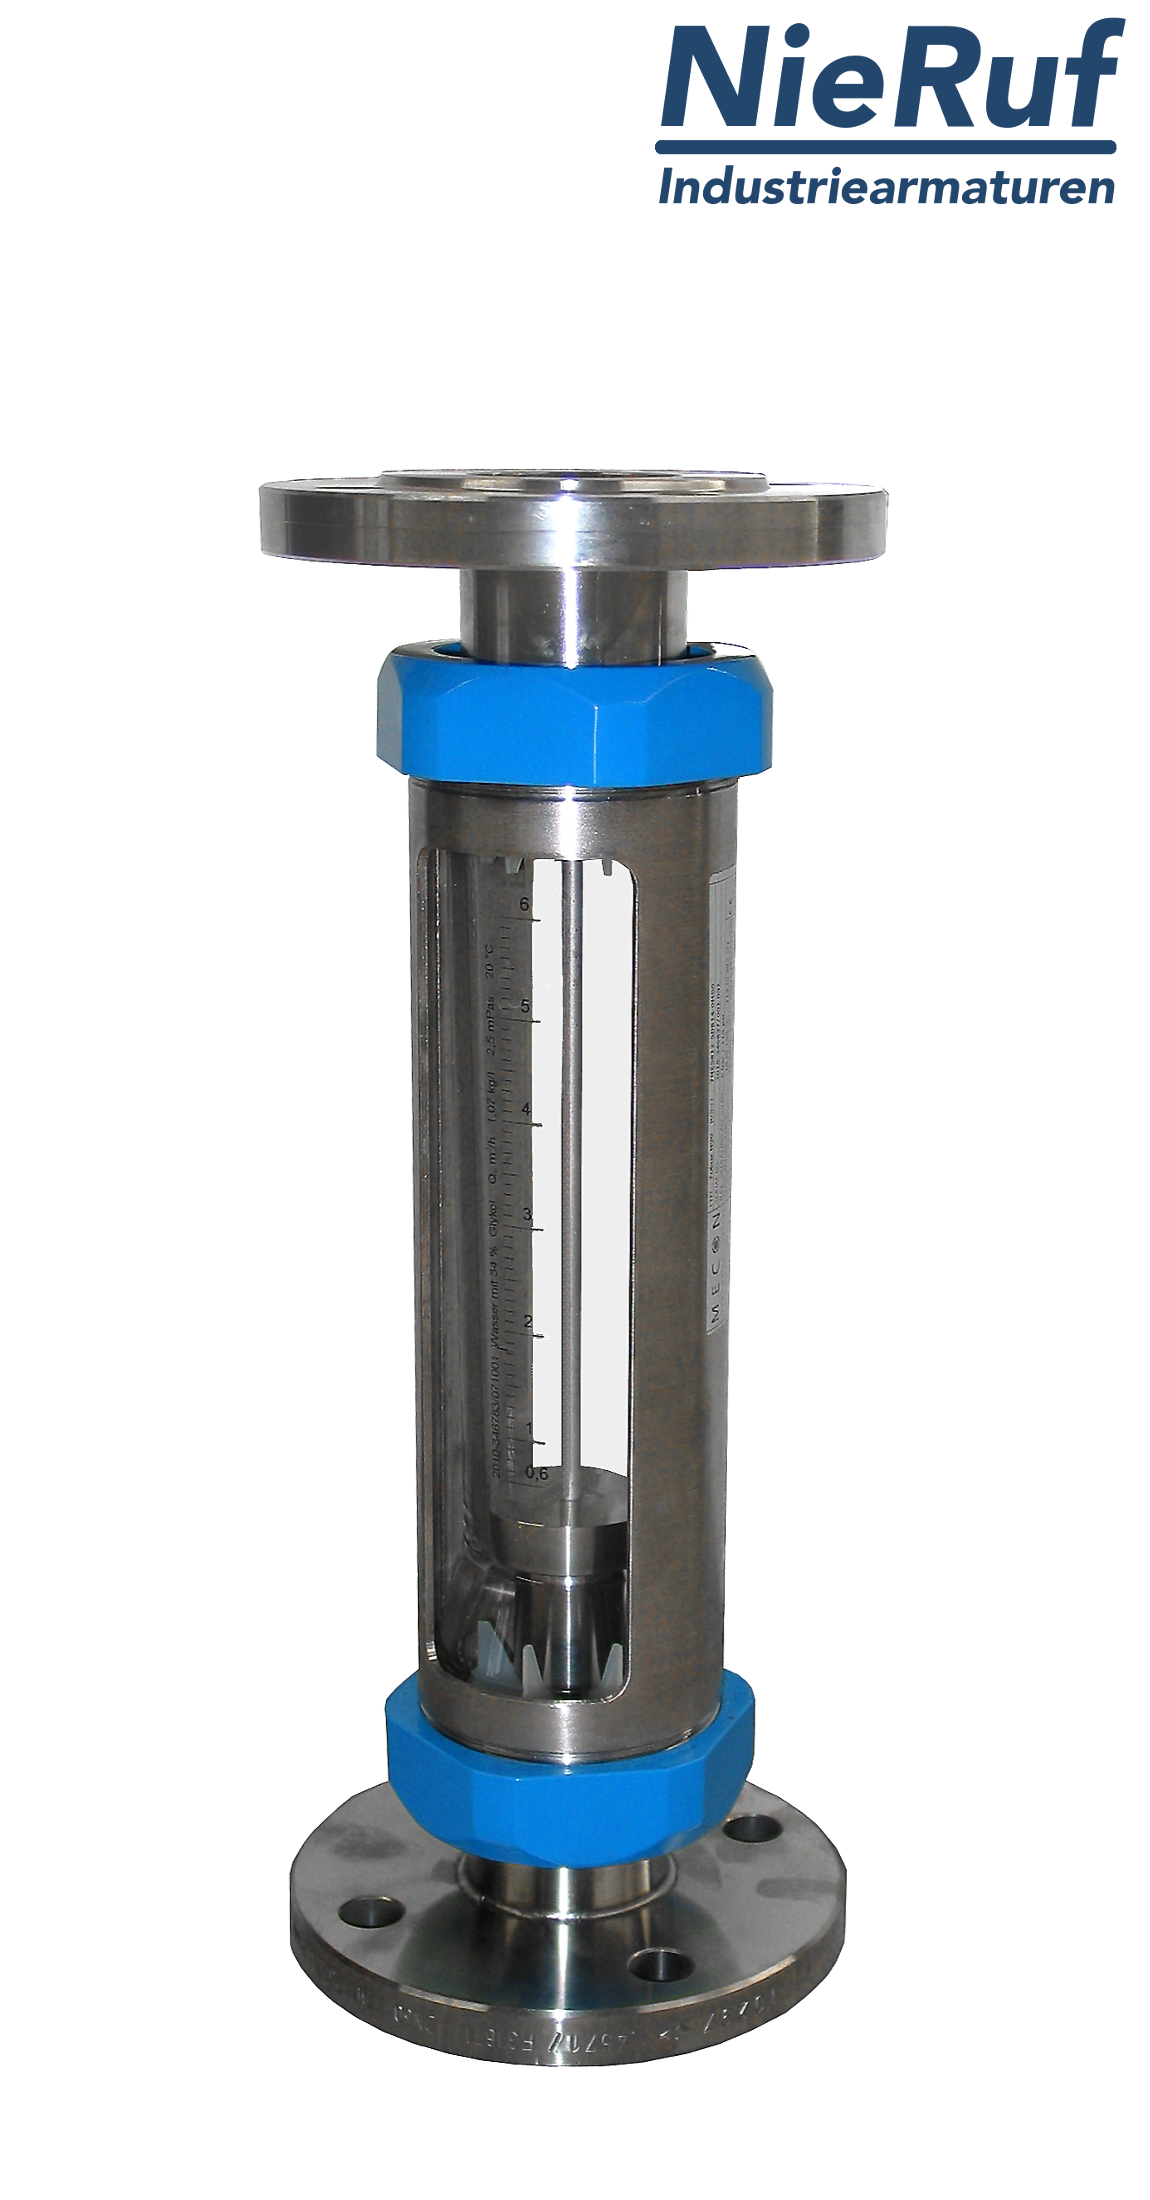 Variable area flowmeter stainless steel + borosilicate flange DN25 125.0 - 1250 l/h water FKM